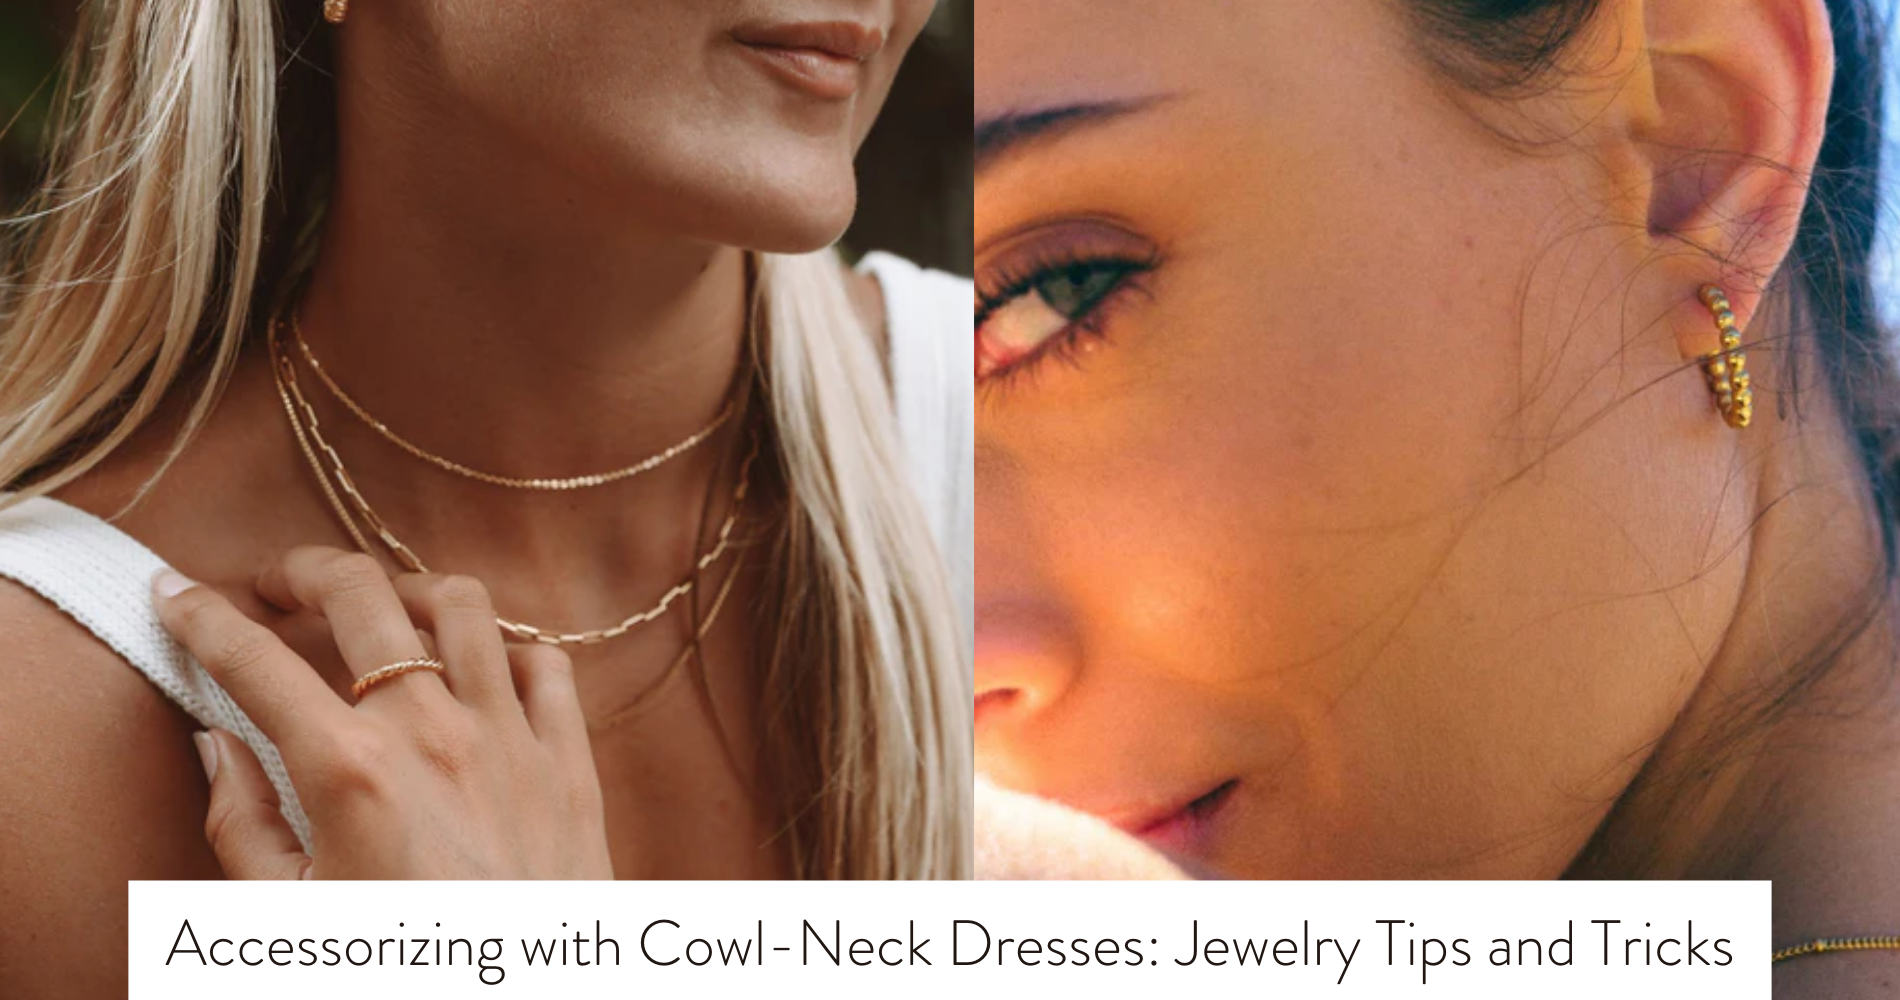 Accessorizing with Cowl-Neck Dresses: Jewelry Tips and Tricks